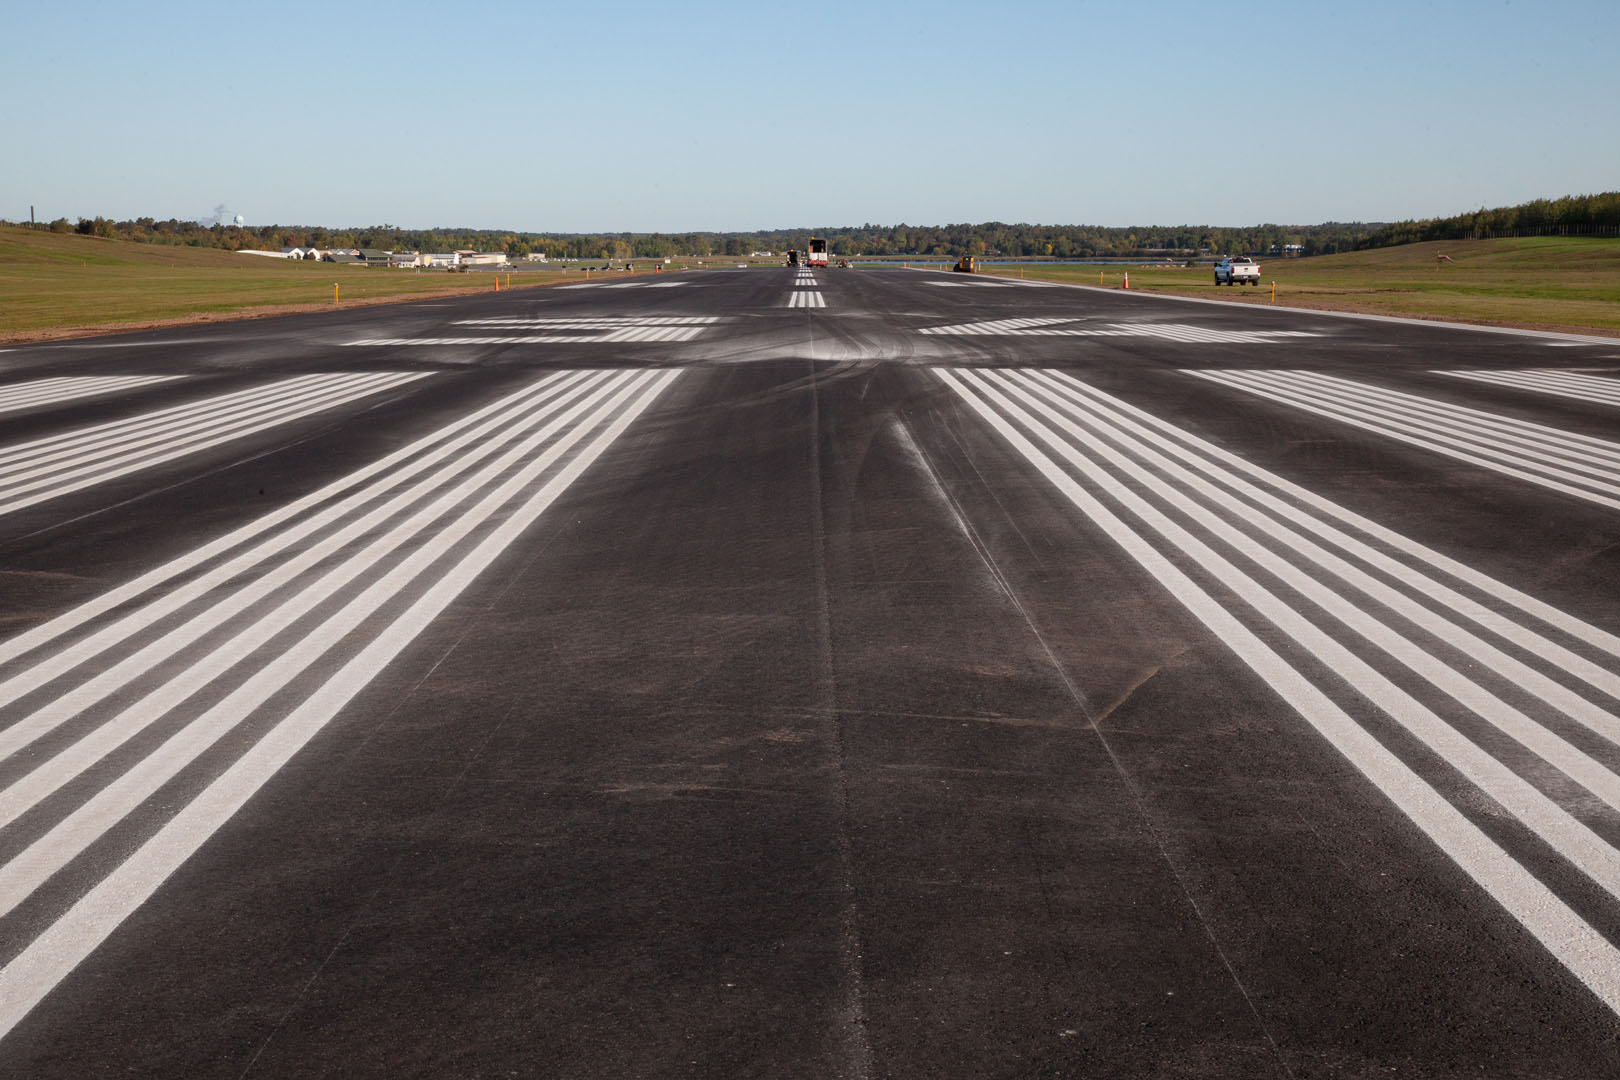 Paved runway with striping at an airport